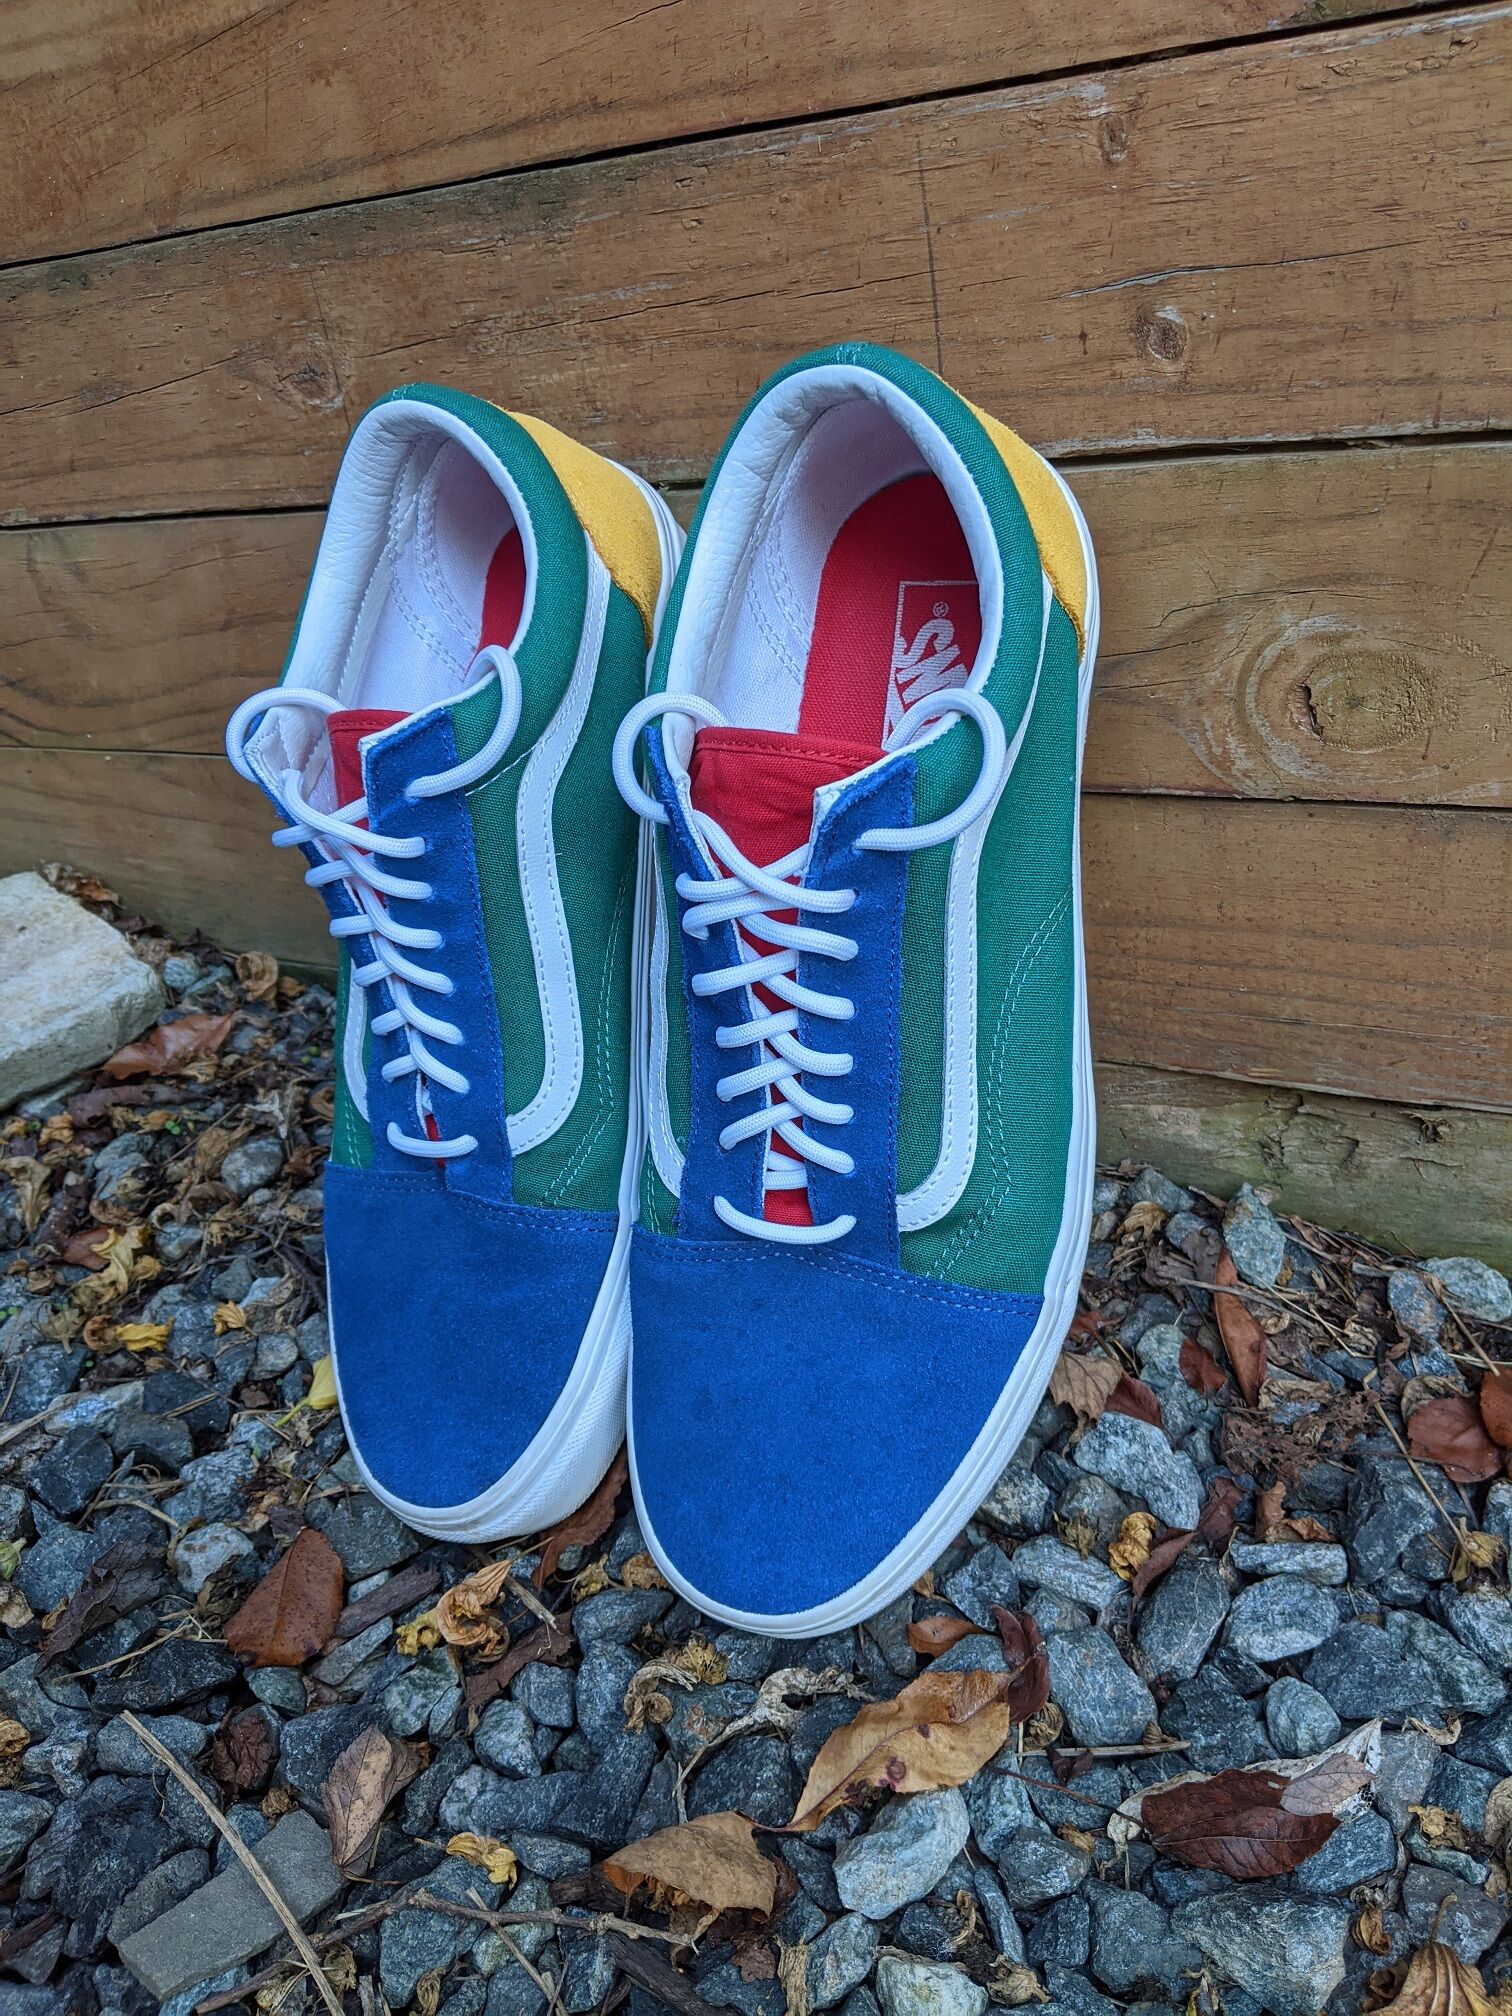 partikel assistent Pogo stick spring Vans Old Skool Yacht Club: 2 Year Review - 100wears Long Term Review